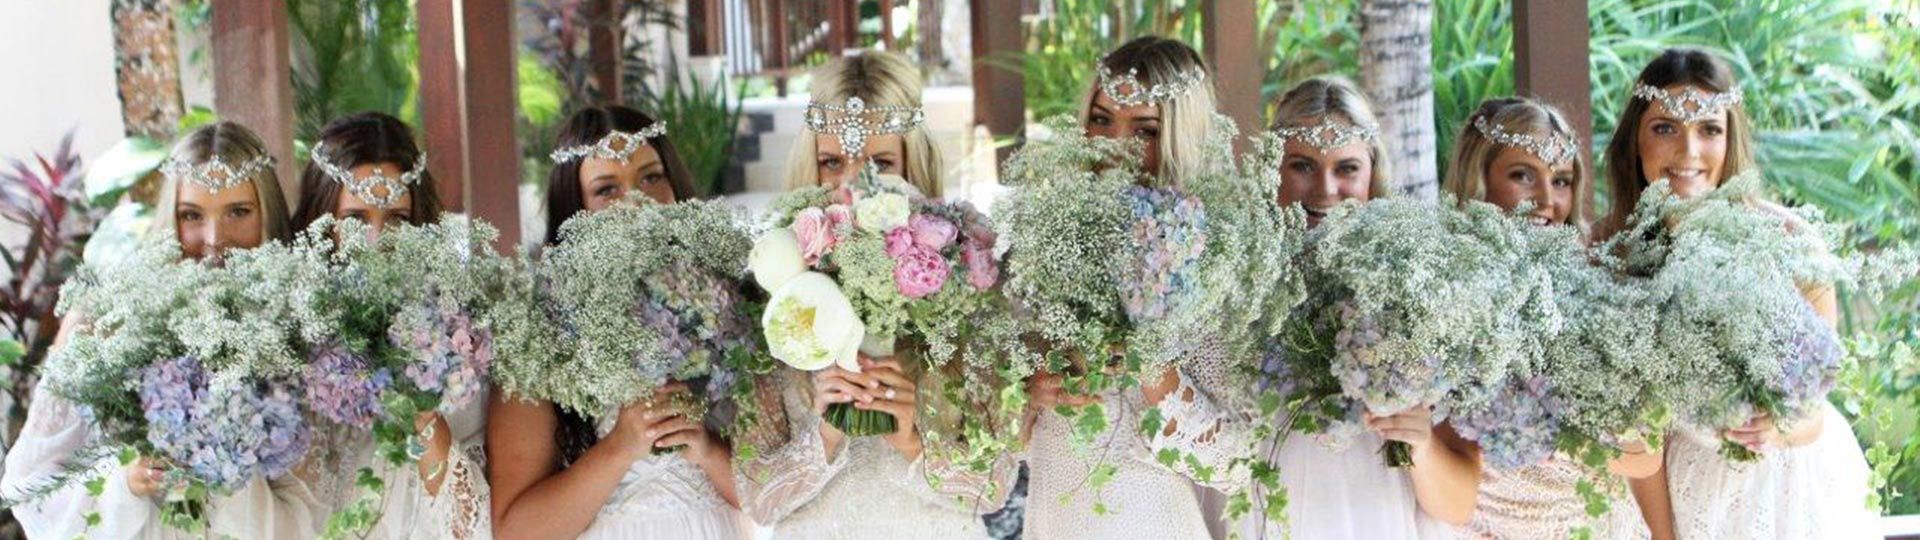 Say 'I Do' in Bali: Your Ultimate Guide to Getting Legally Married